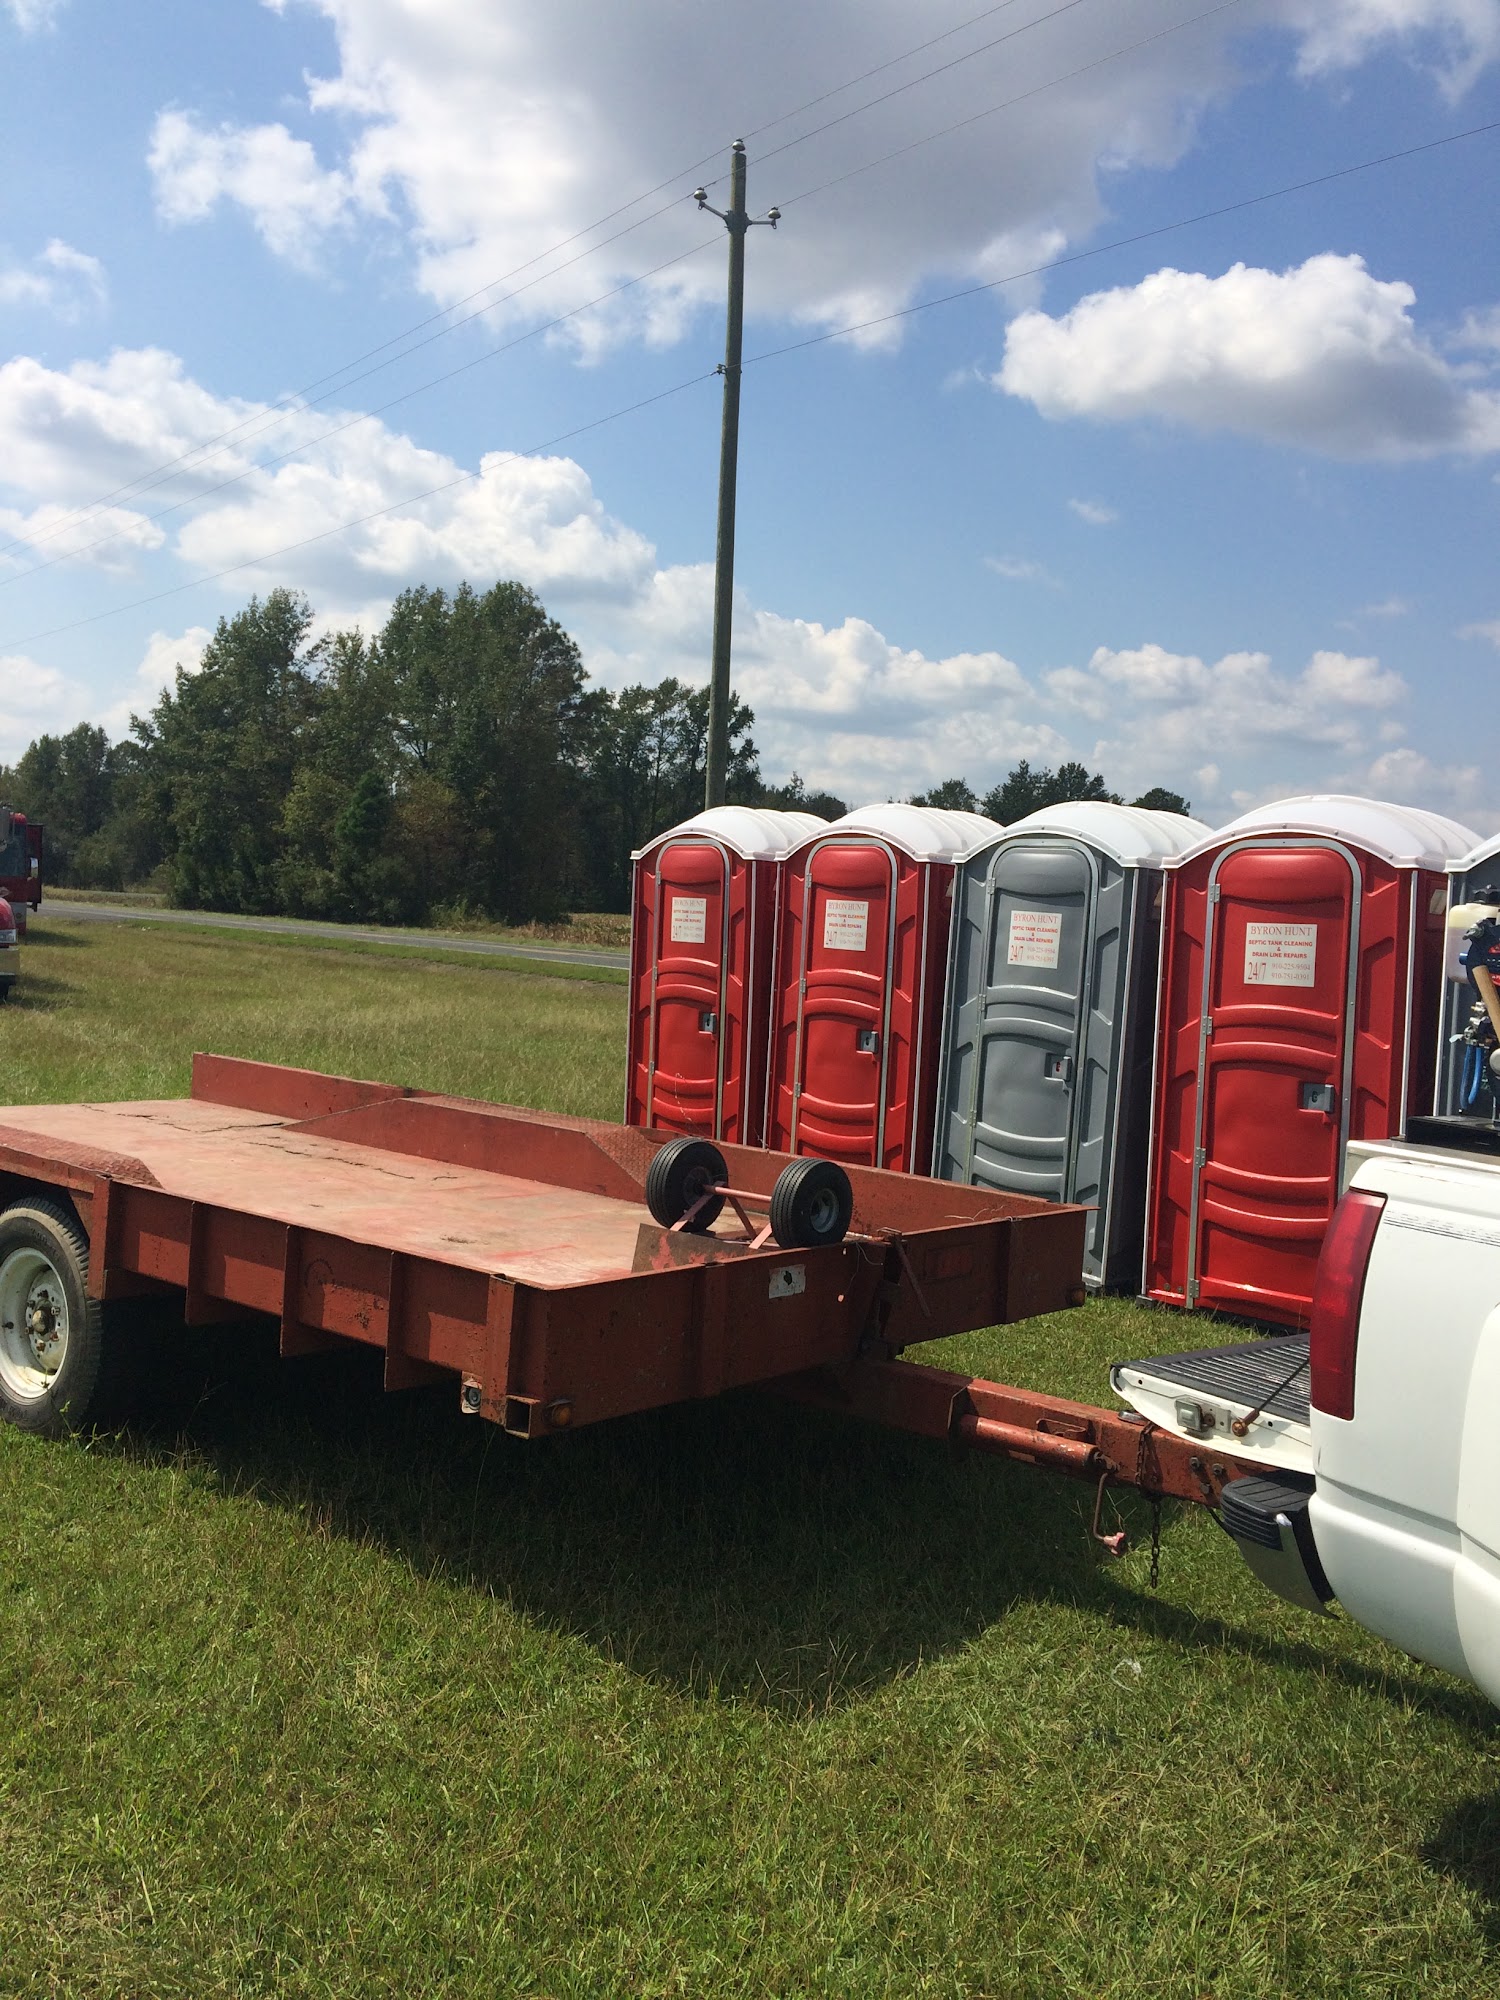 Byron Hunt Septic Cleaning & Portable Toilets 3259 Shannon Rd, Shannon North Carolina 28386